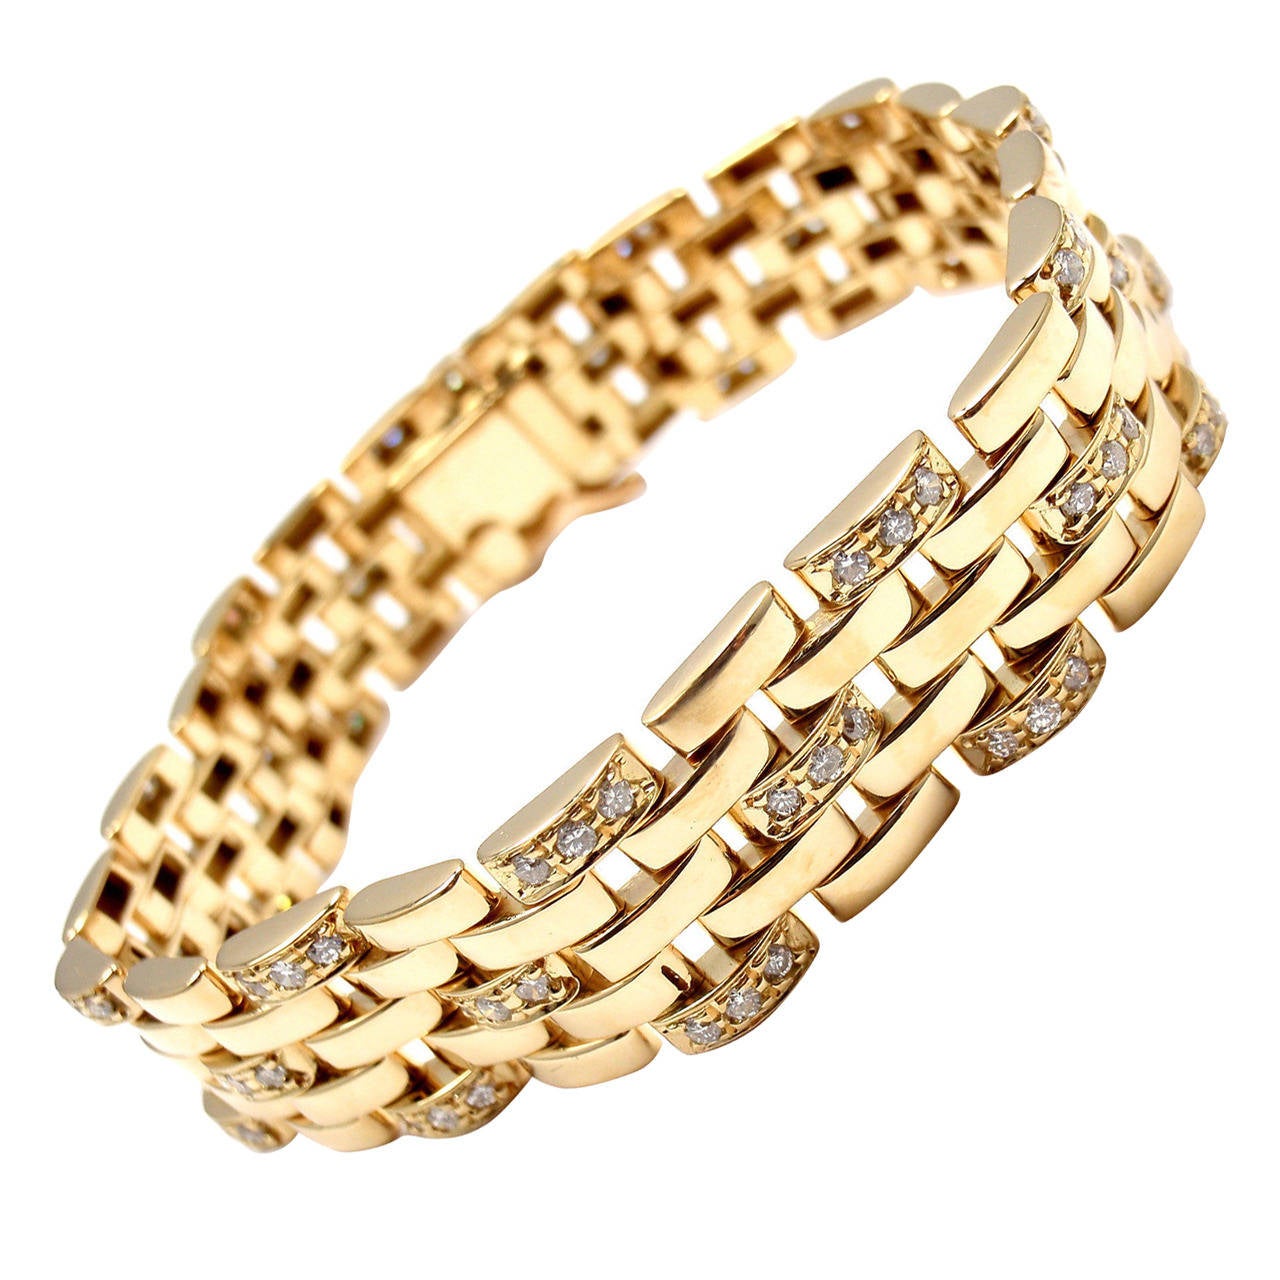  Cartier  Maillon Panthere Diamond  Five Row Link Gold 